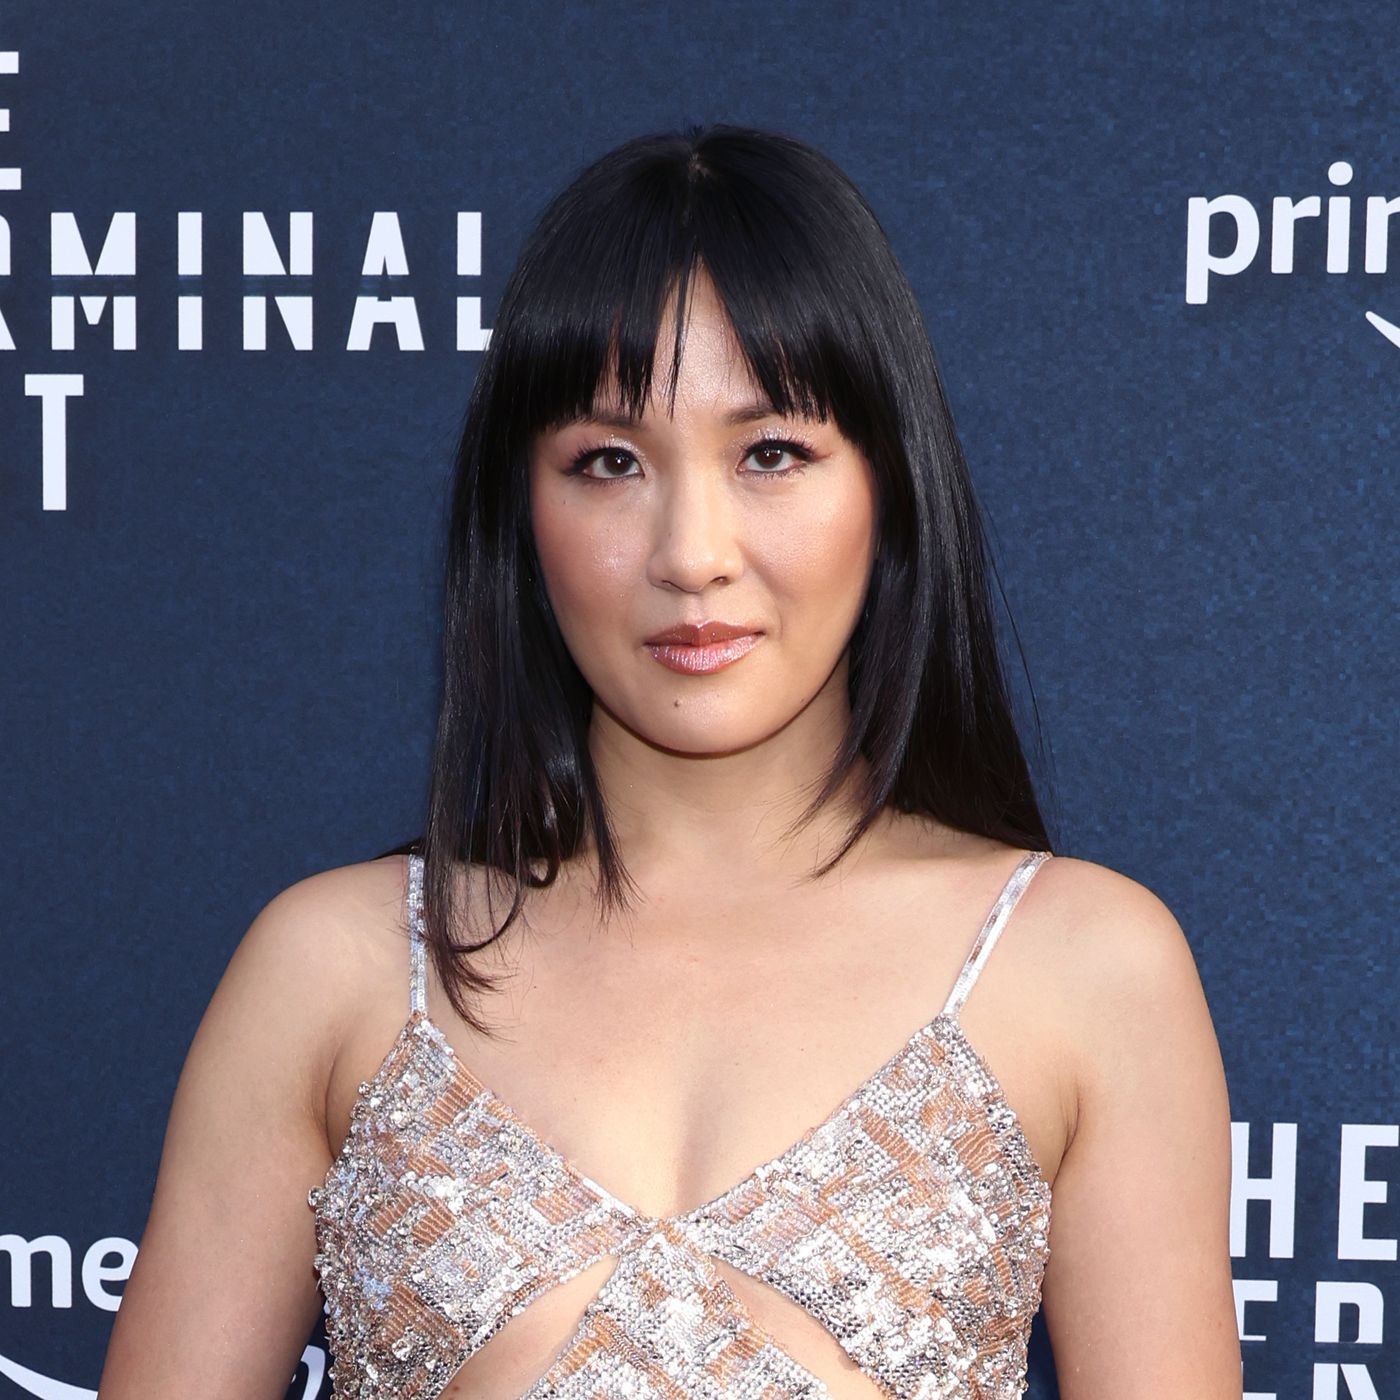 Chinese Father In Law Raip Hot Sex Videos - Constance Wu's 'Making a Scene': Most Revealing Moments